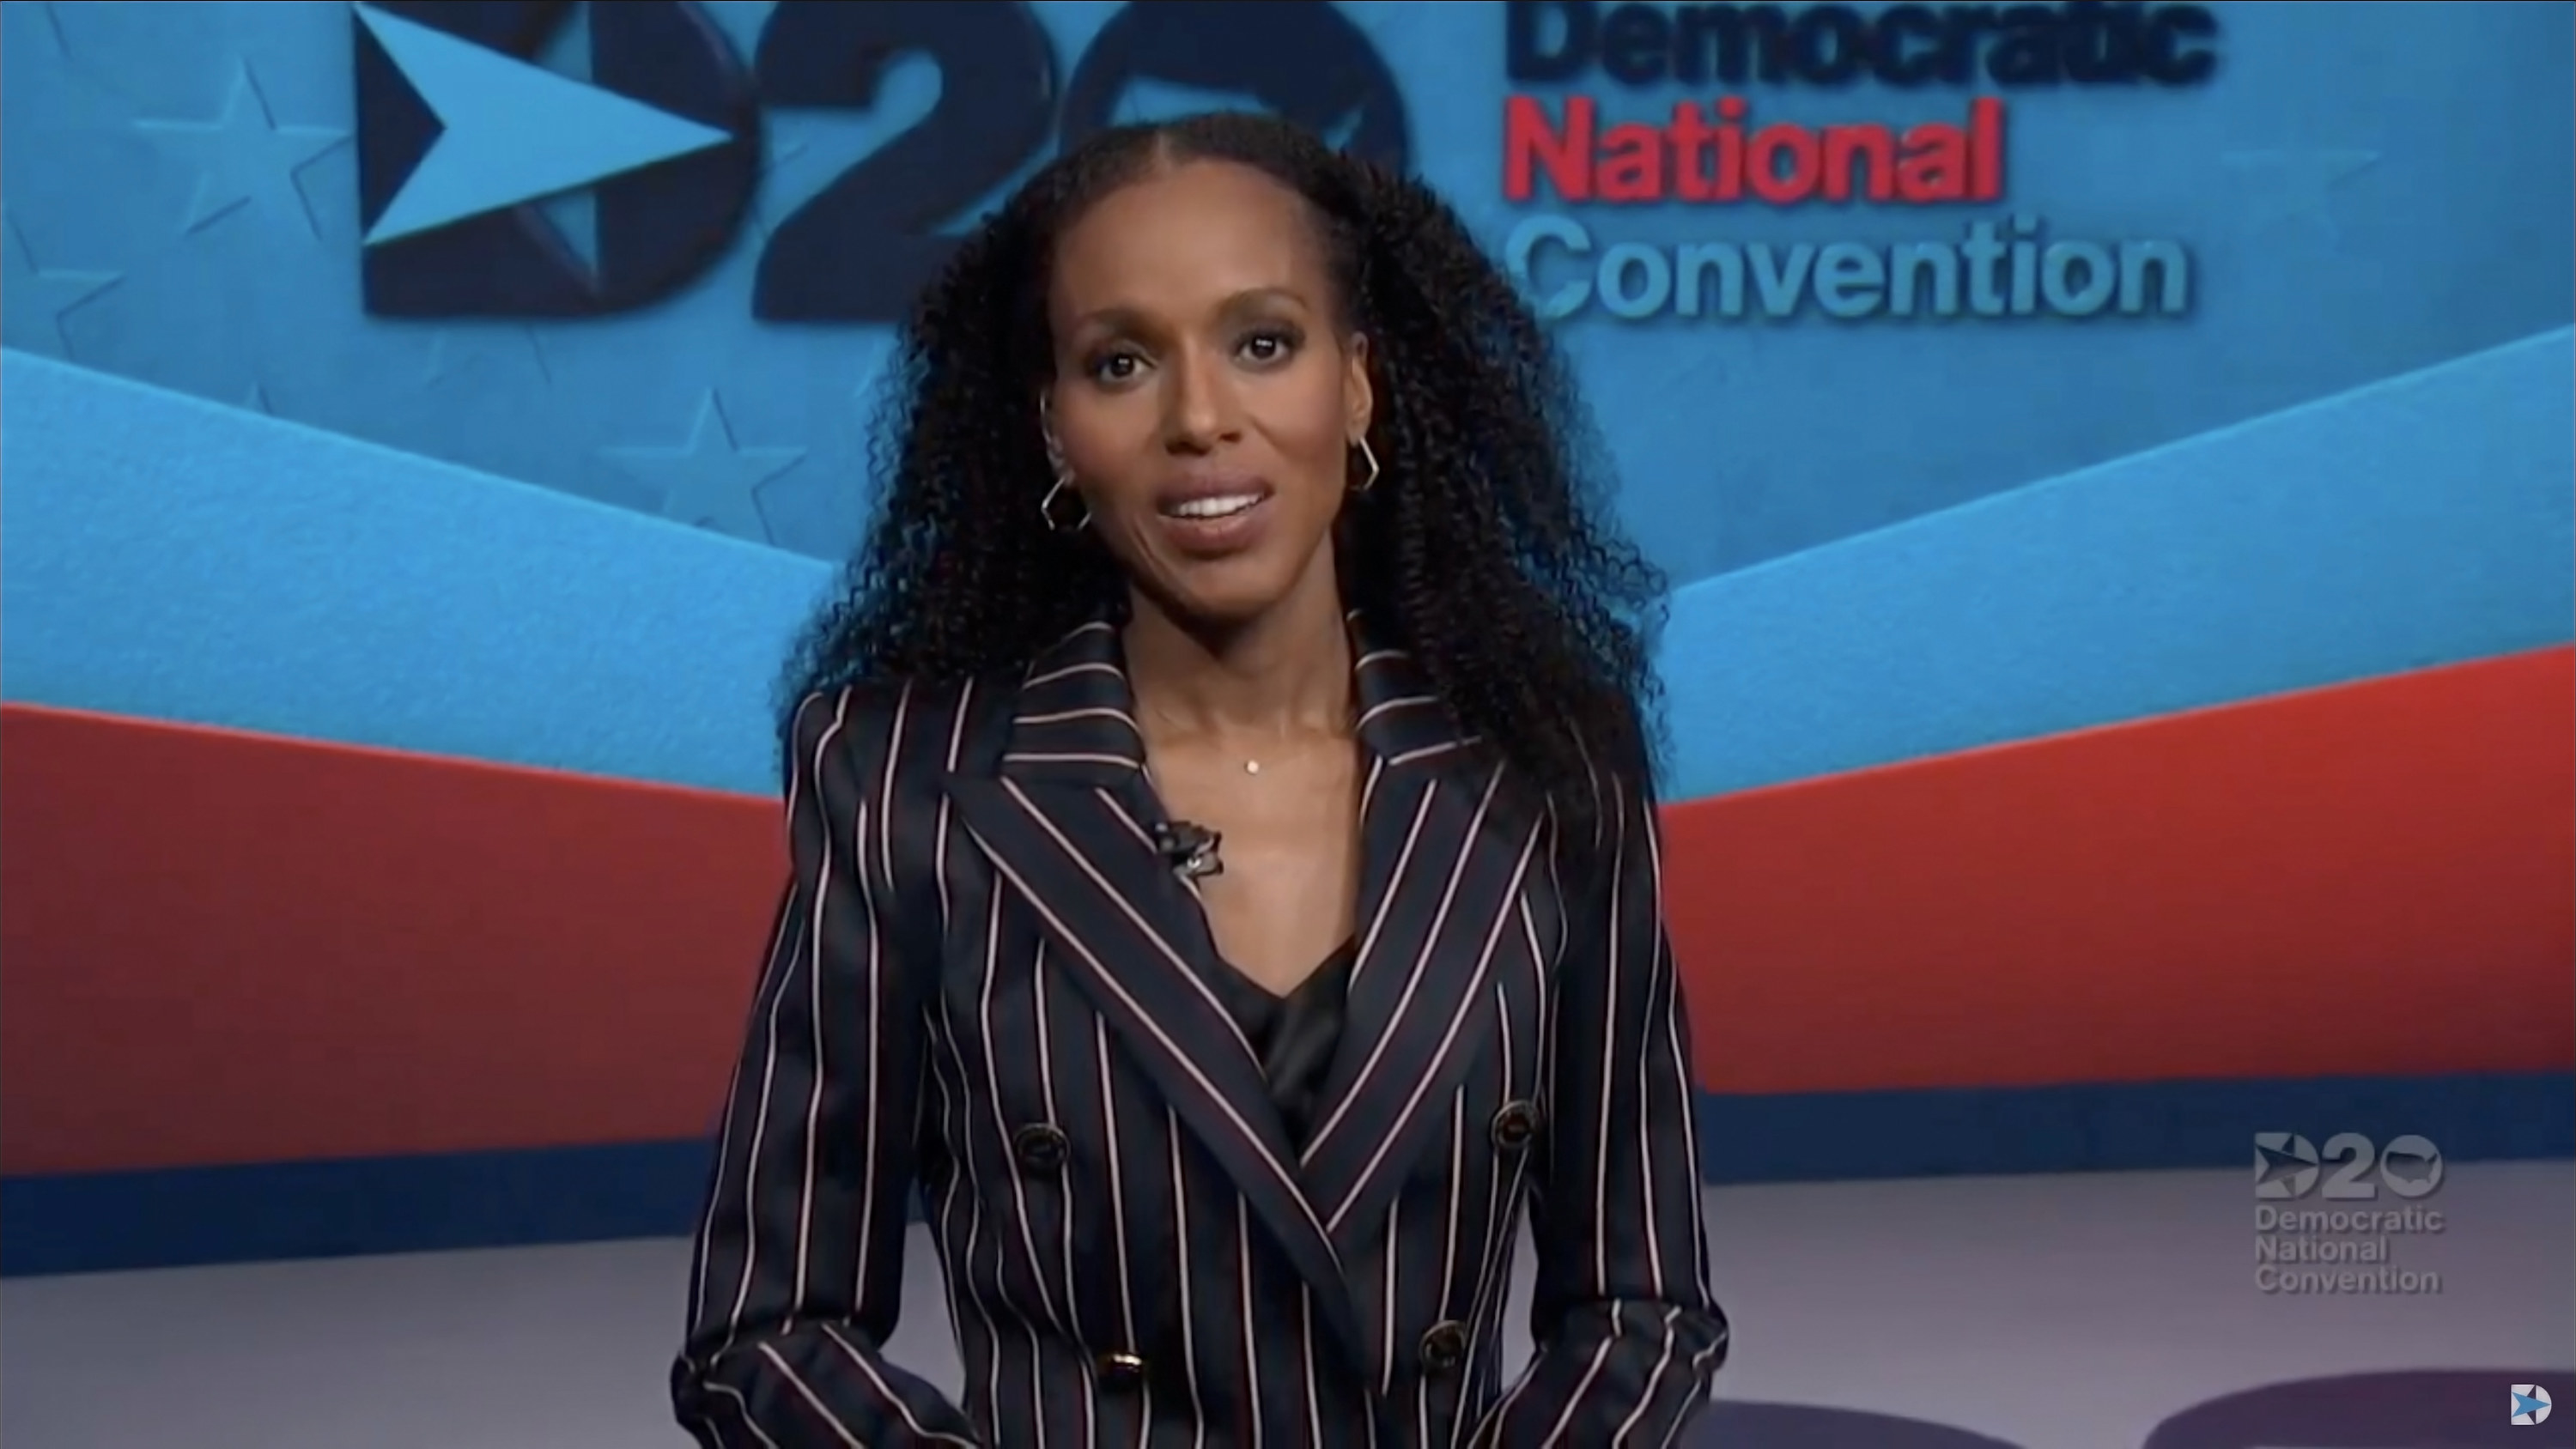 Kerry Washington opens the Democratic National Convention in 2020